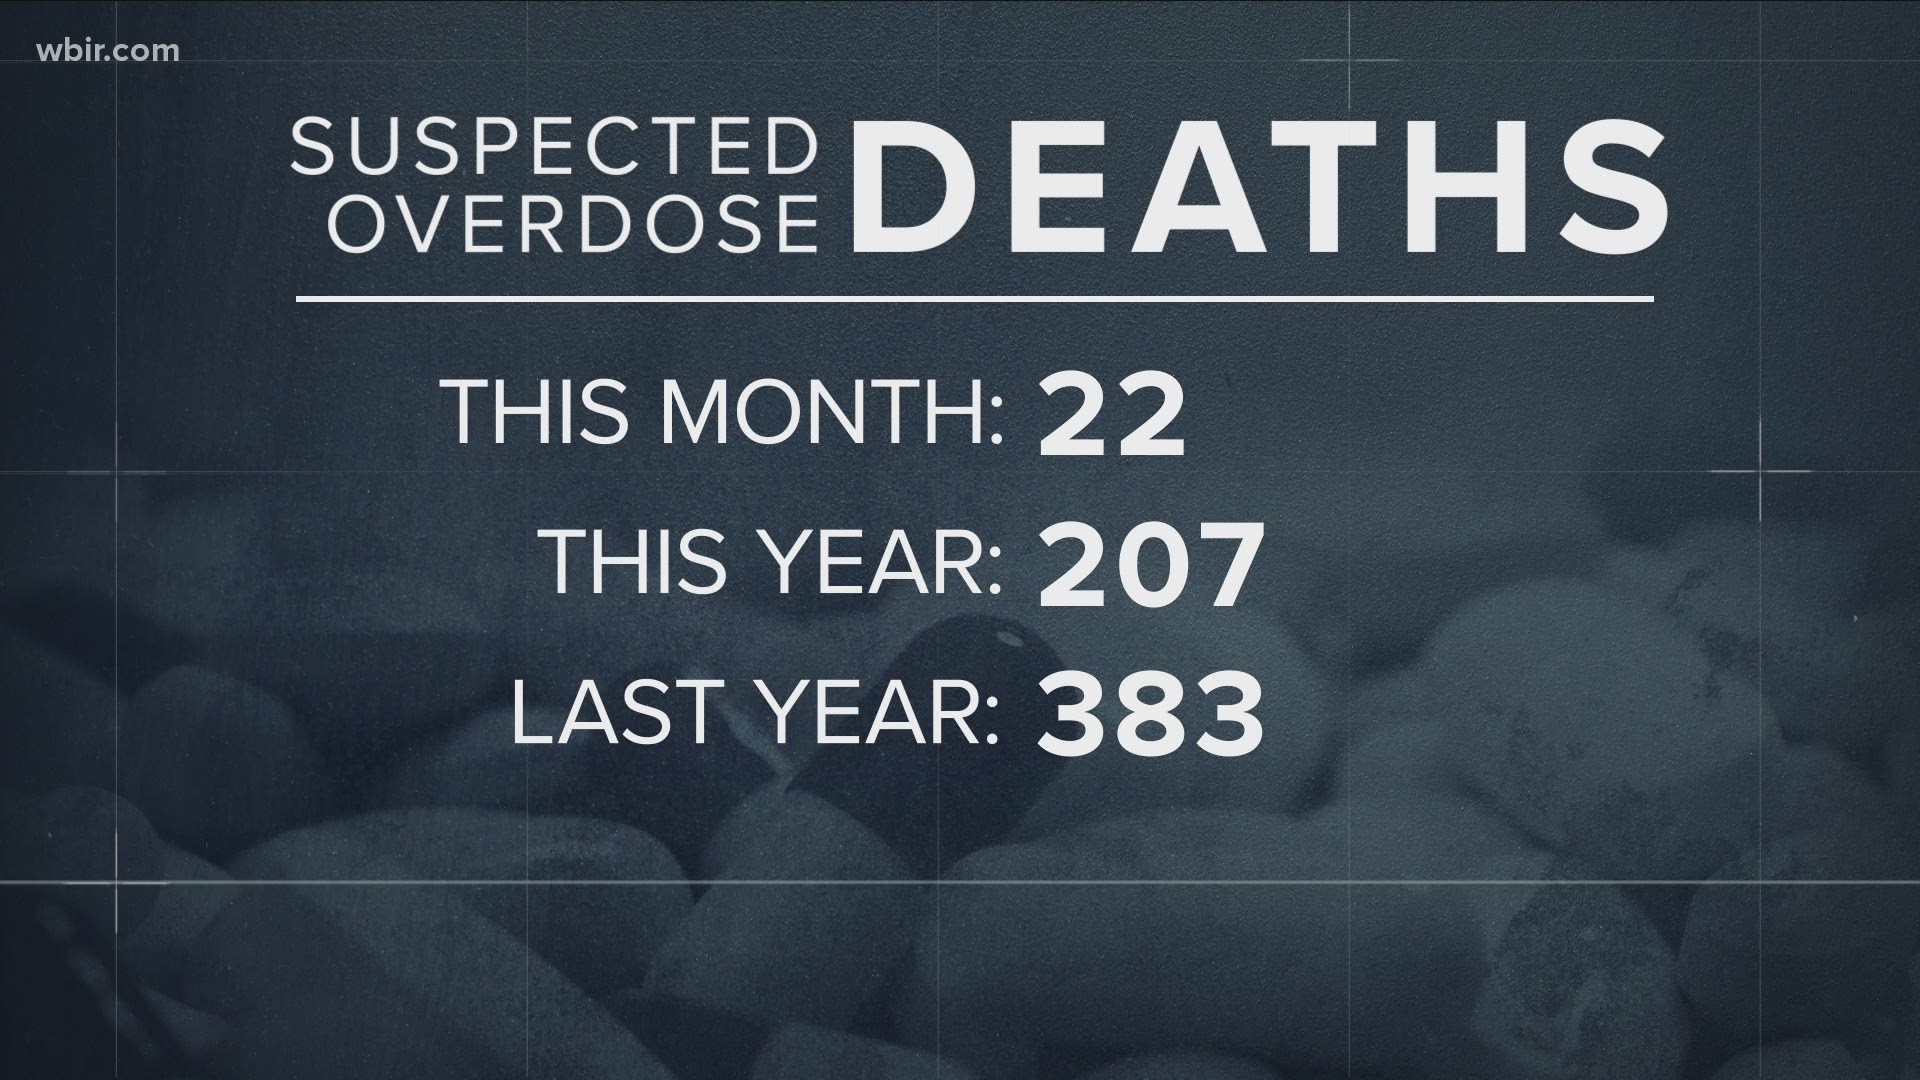 This year 207 people have died of suspected overdoses in Knox County, including 22 so far this month. That's a pace that could set a new annual record.